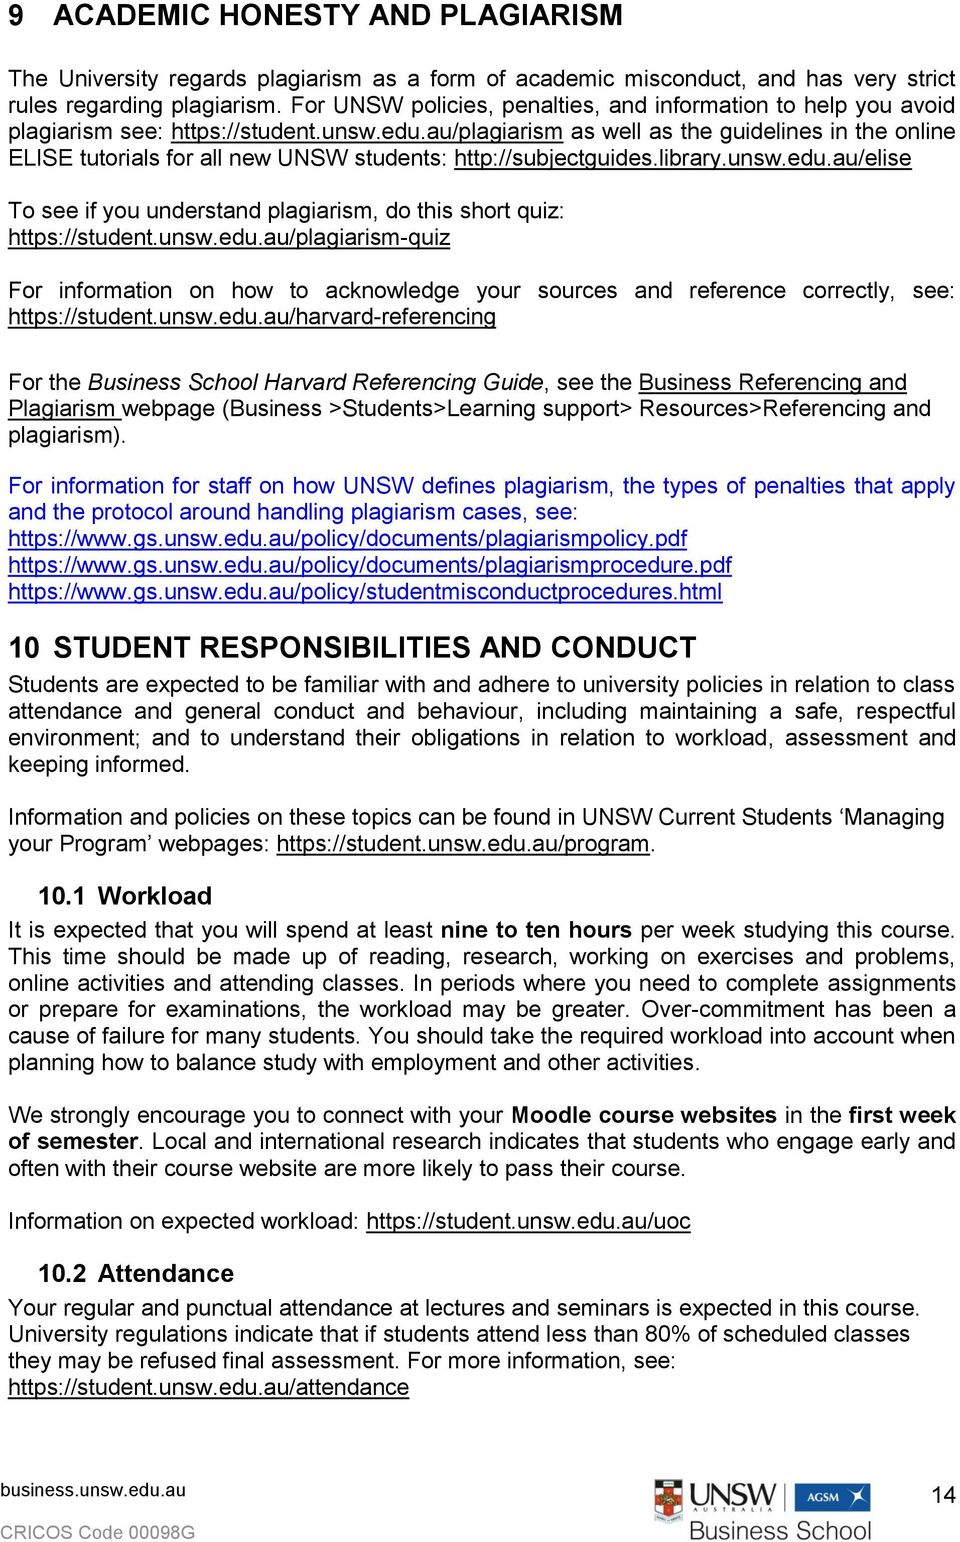 au/plagiarism as well as the guidelines in the online ELISE tutorials for all new UNSW students: http://subjectguides.library.unsw.edu.